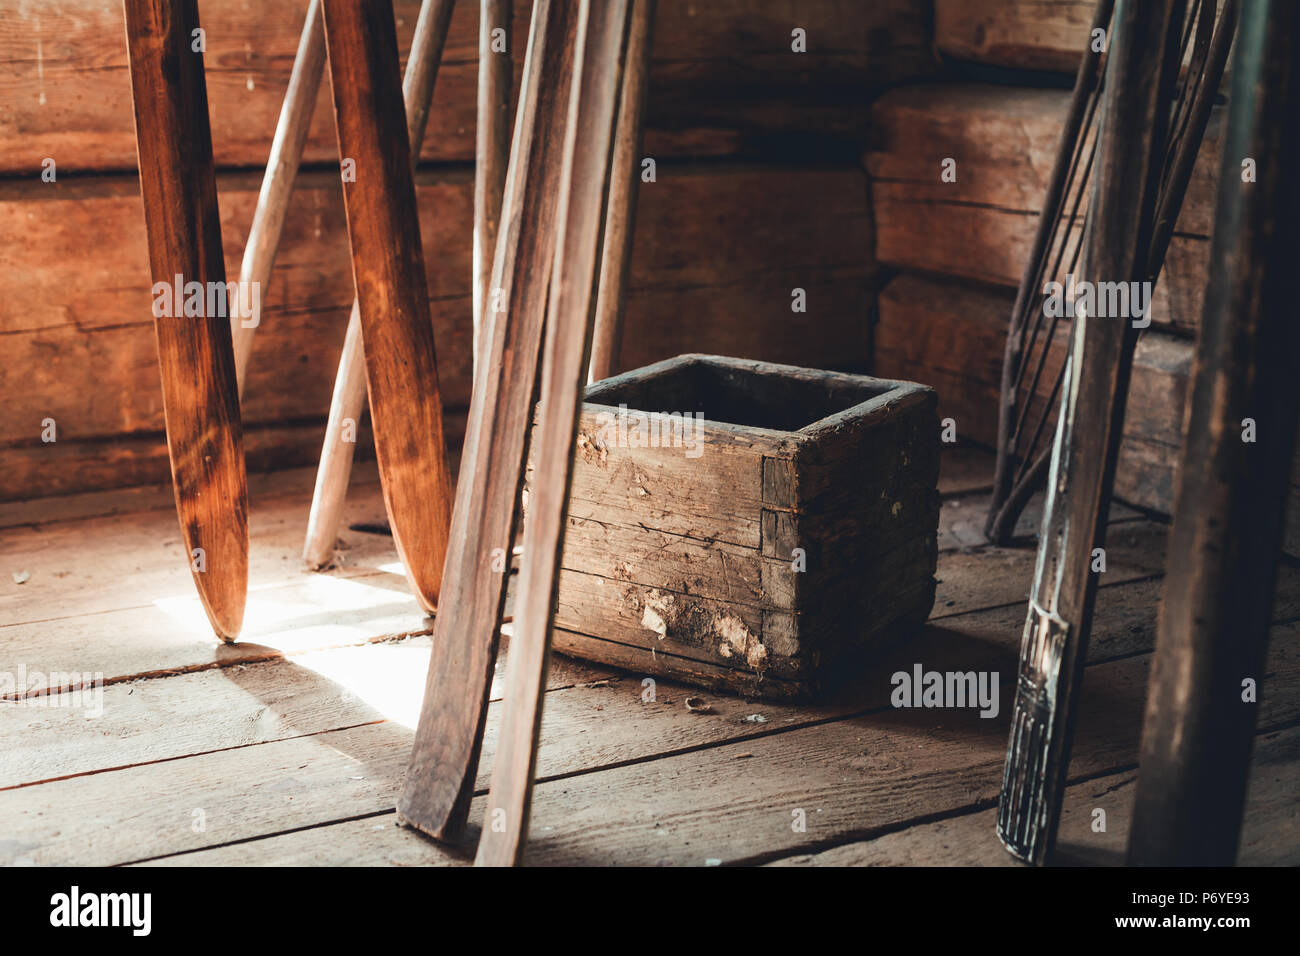 Rustic potato box and wooden skis in front of weathered girder walls Stock Photo